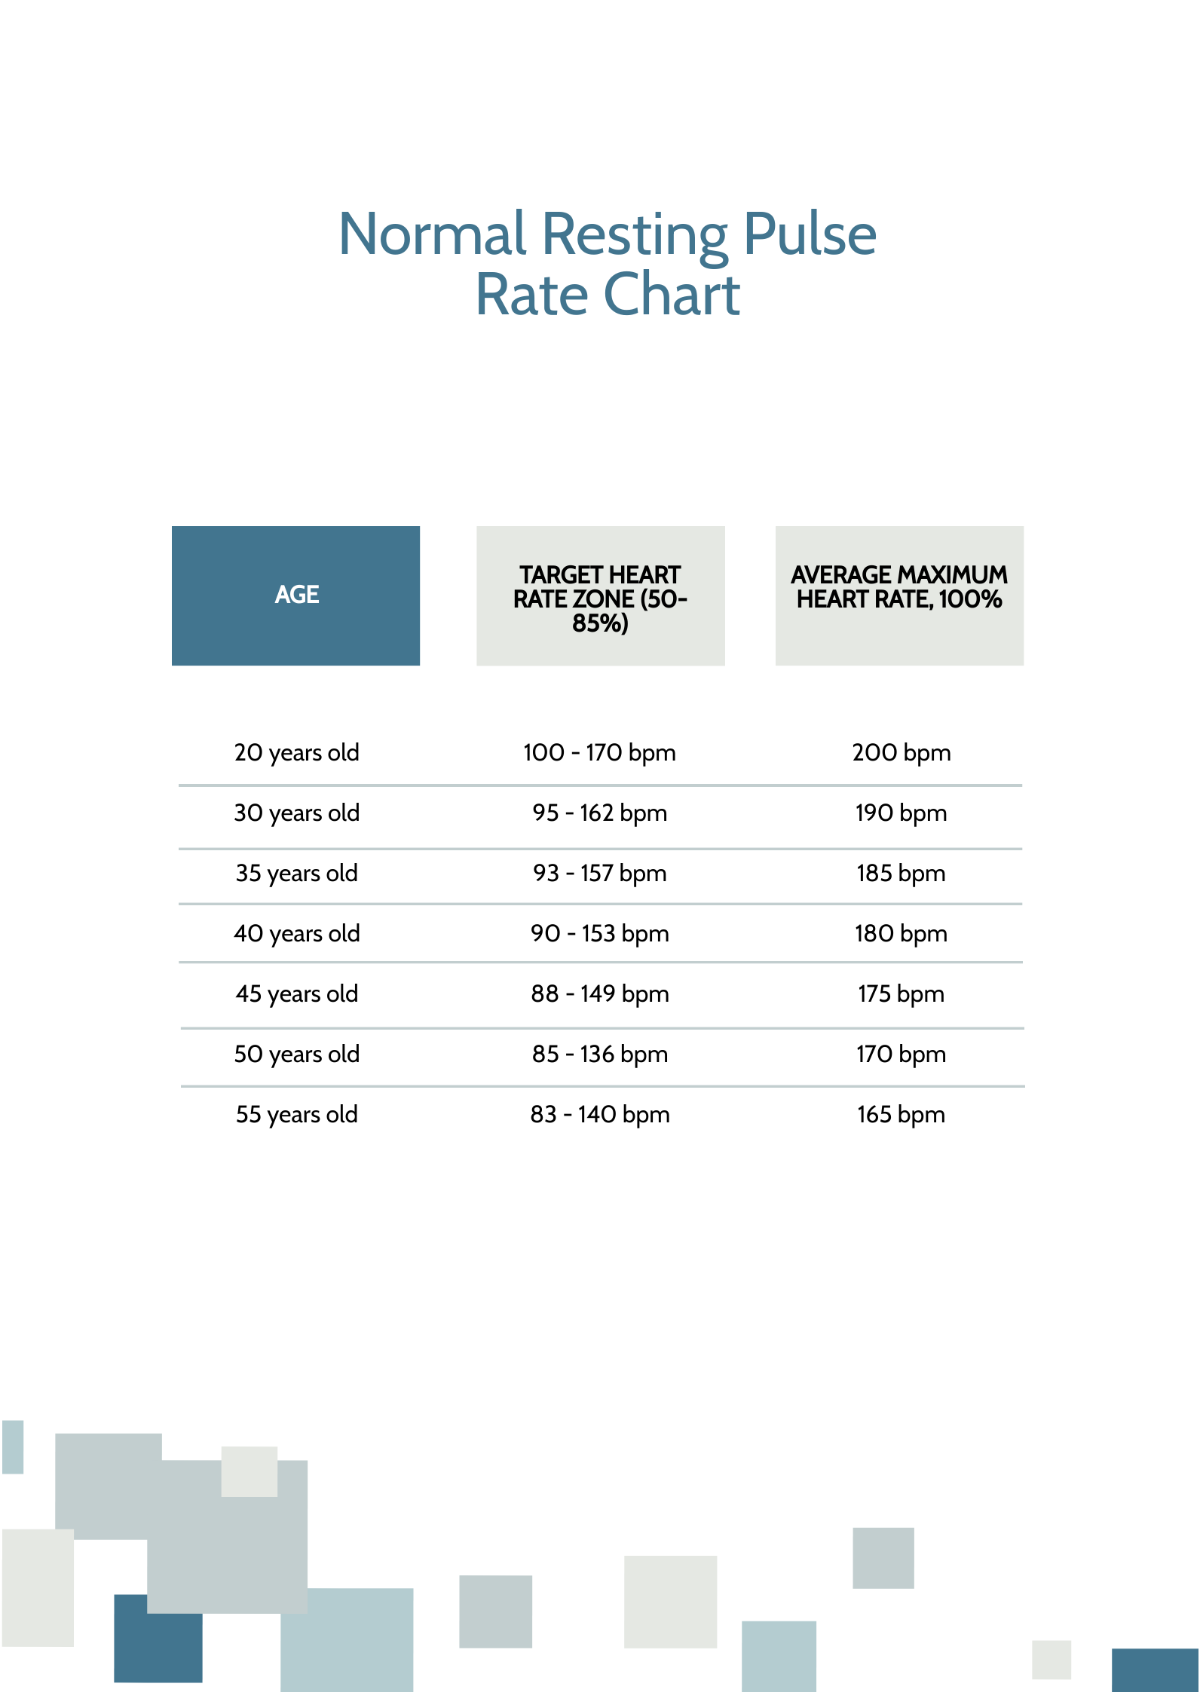 Normal Resting Pulse Rate Chart Template